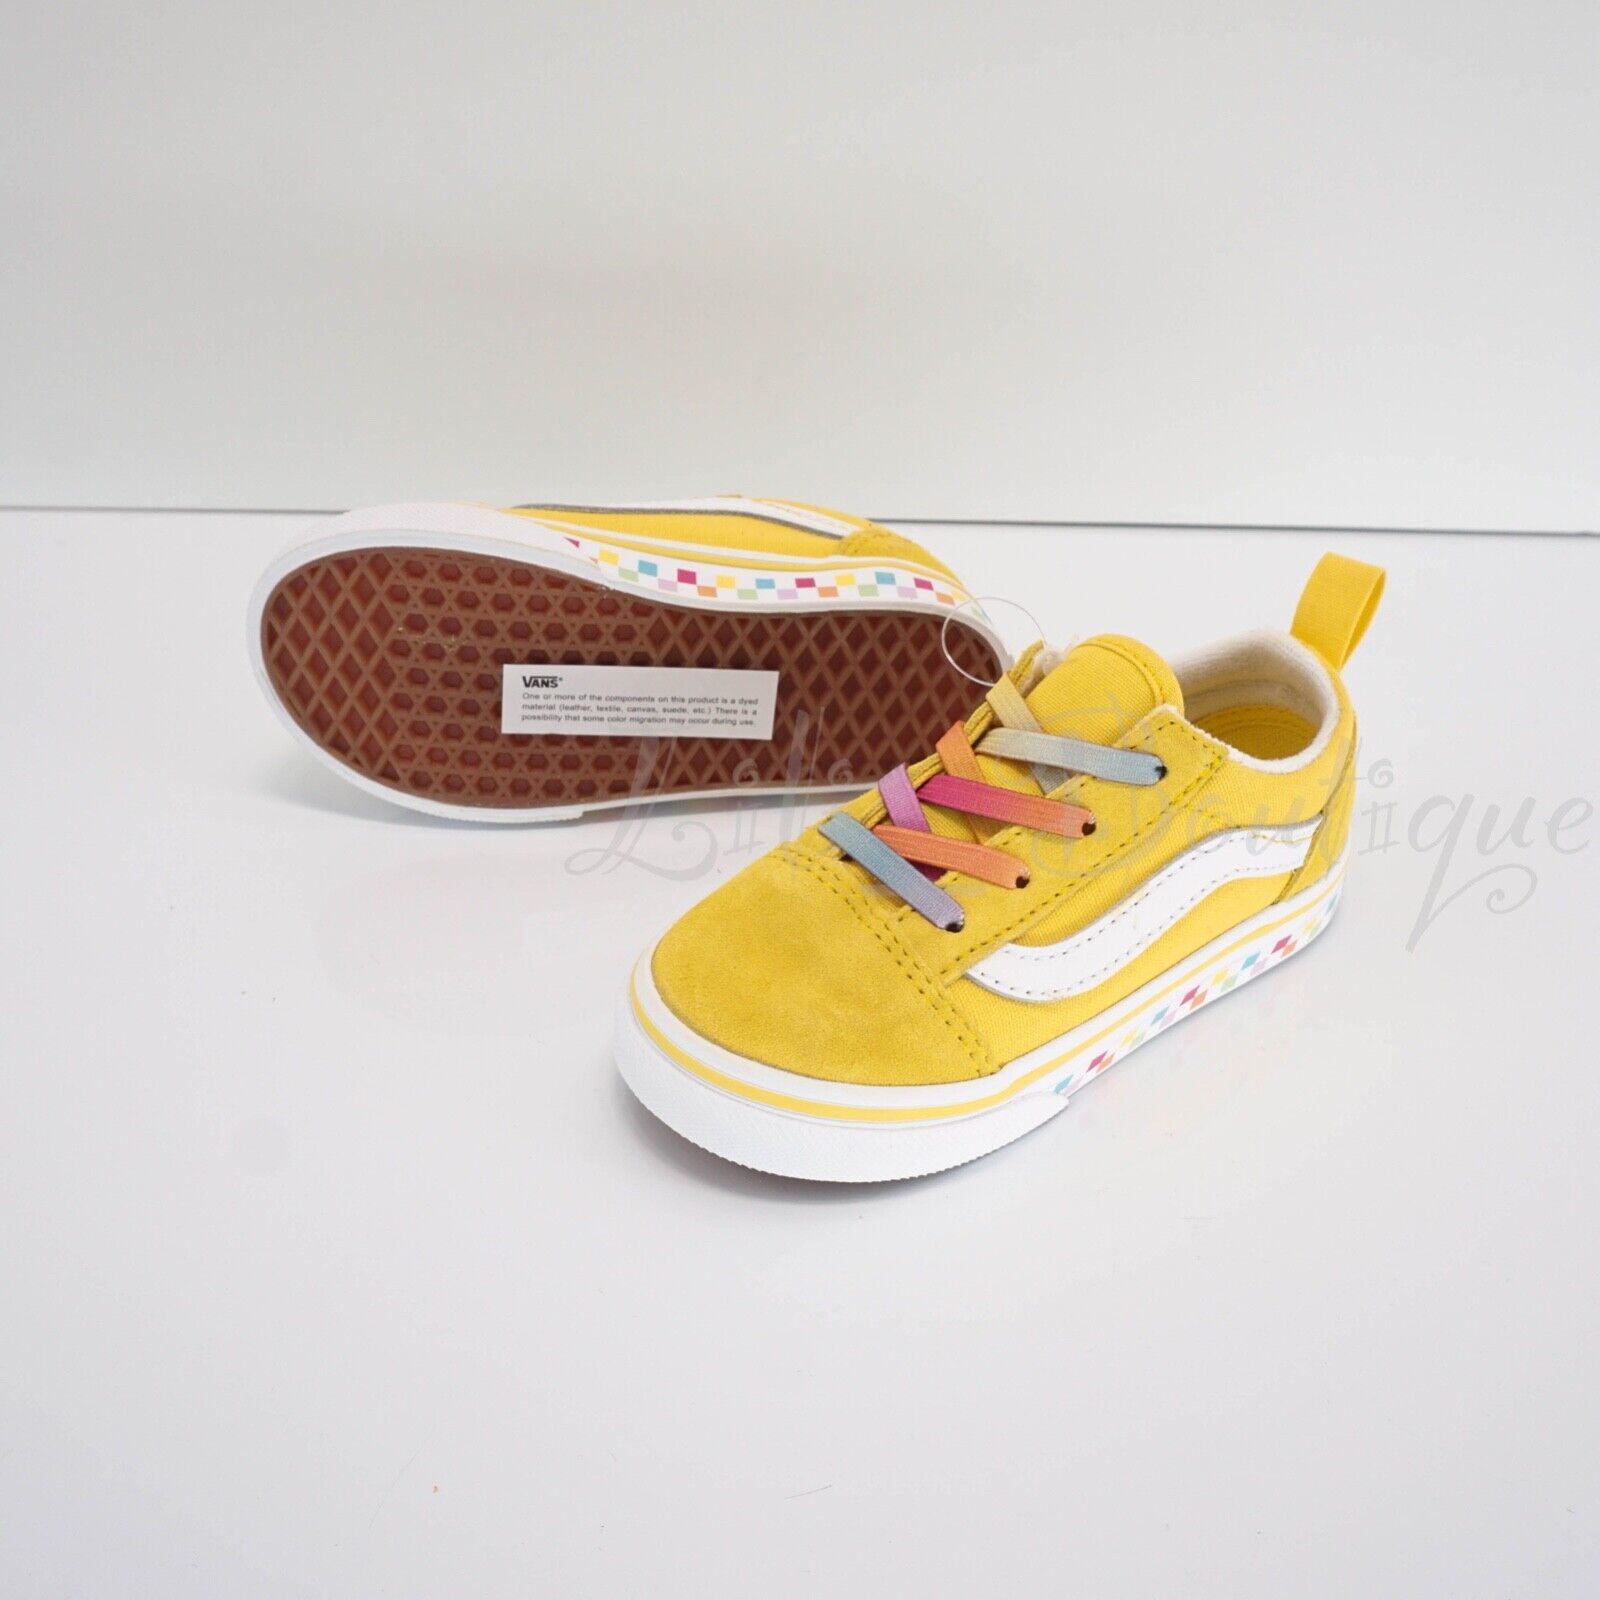 Primary image for No Box Vans Old Skool Rainbow Laces Toddler Shoes Canvas Suede Yellow White 8.5K